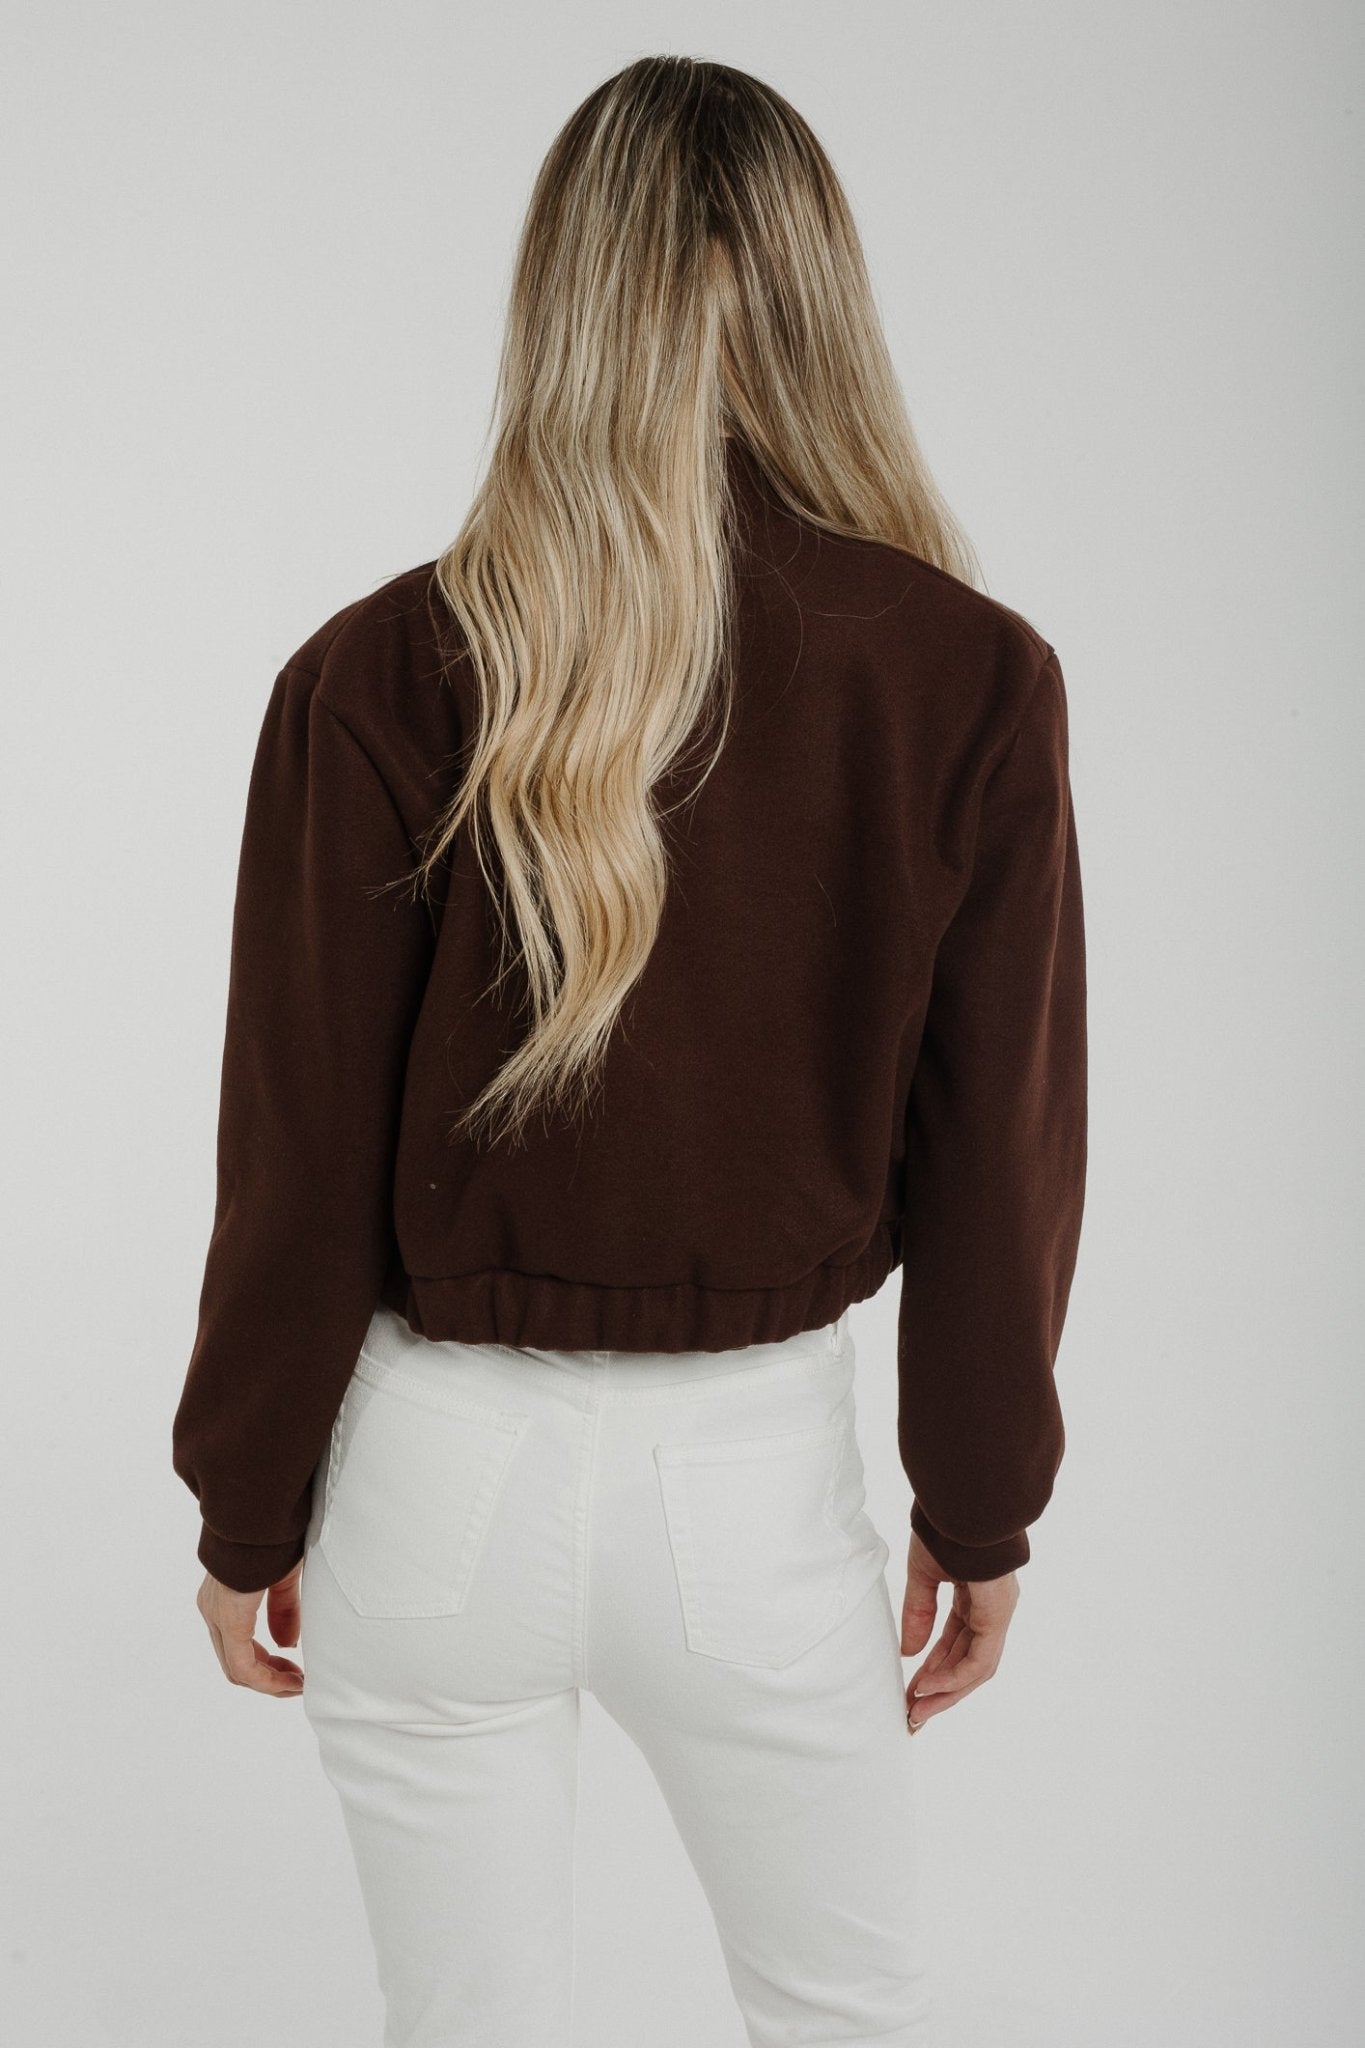 Aria Cropped Jacket In Chocolate - The Walk in Wardrobe